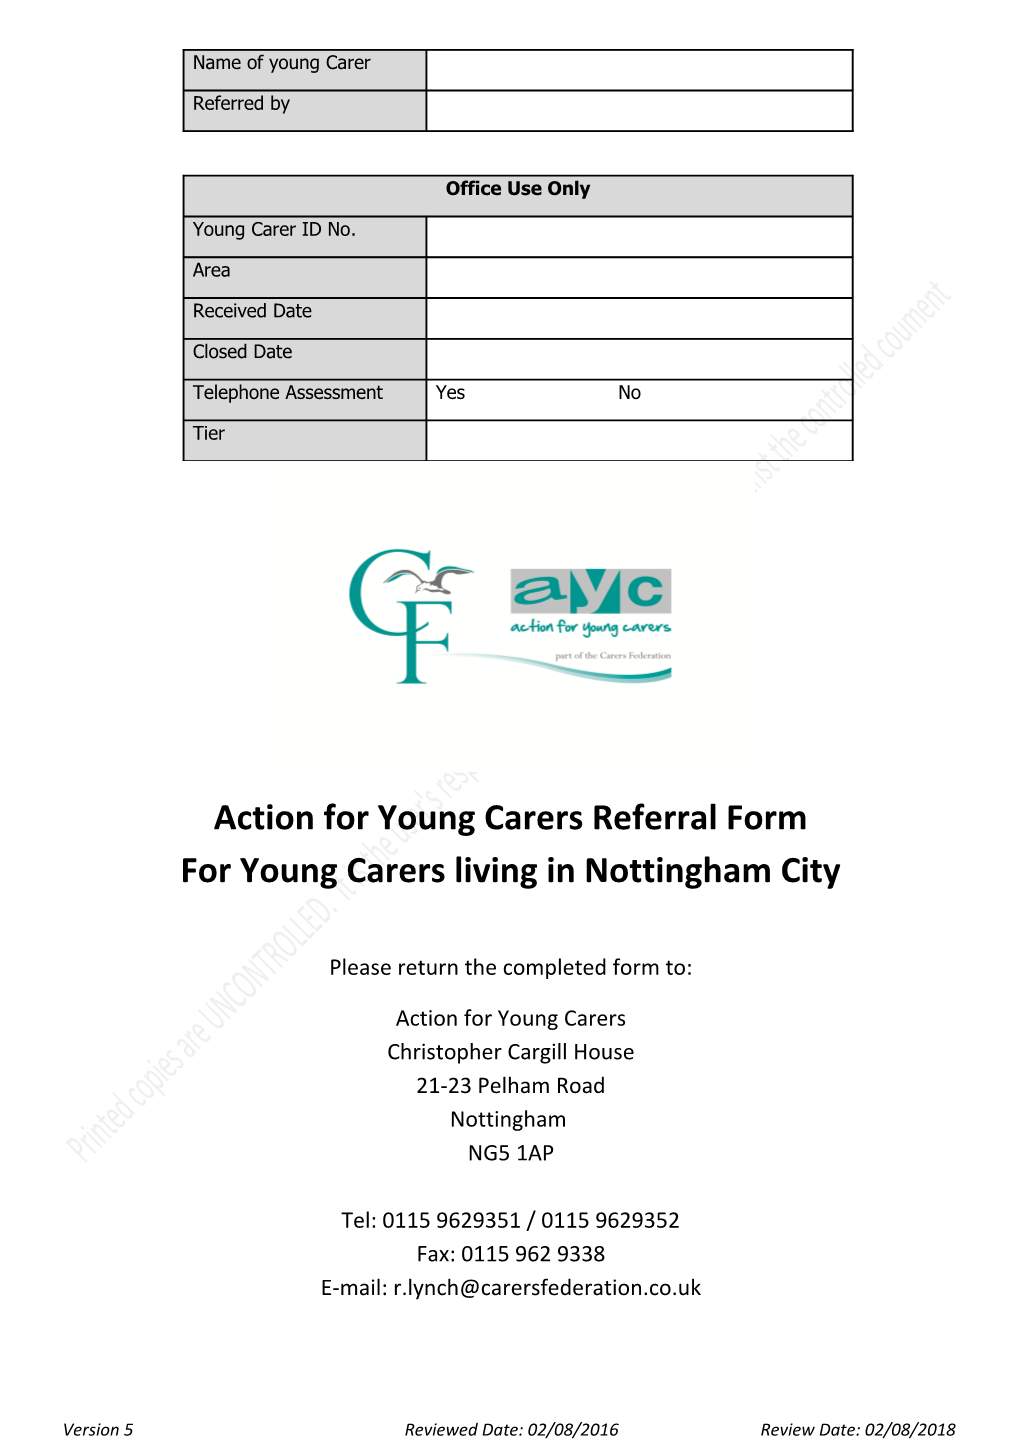 Action for Young Carers Referral Form